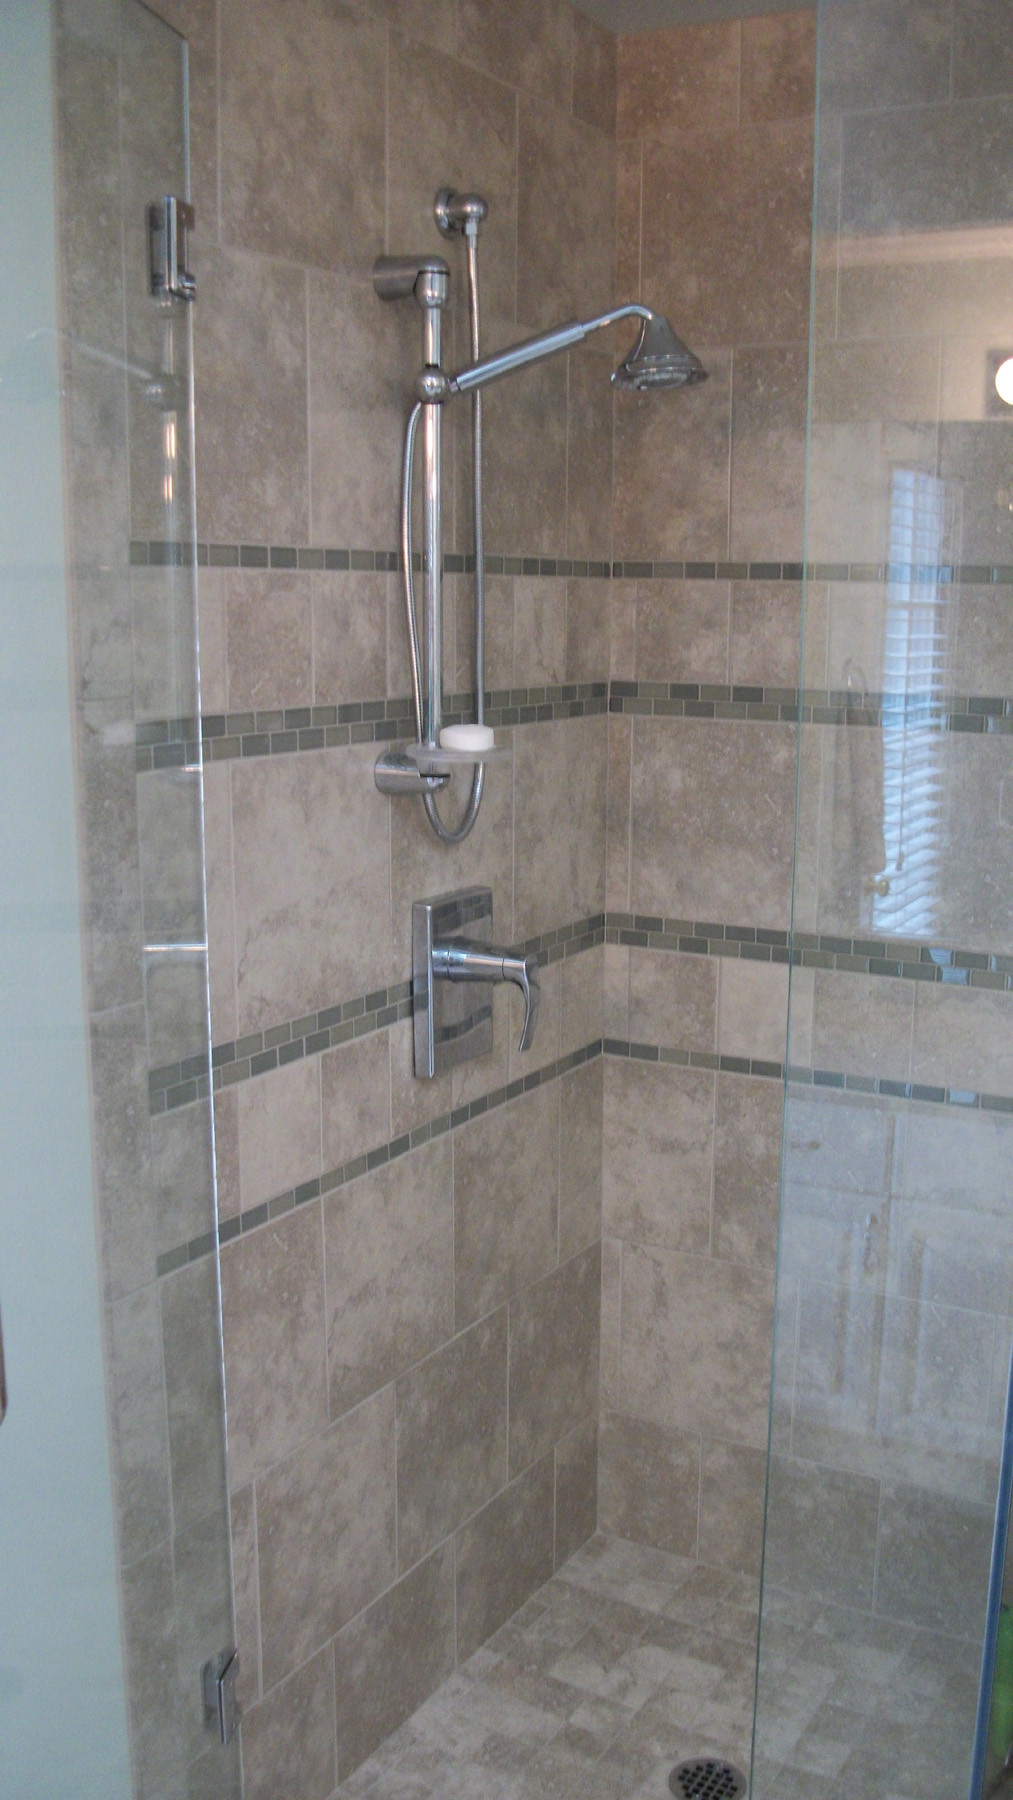 Picture Of Bathroom Showers
 Bath remodel featuring Schon free standing tub